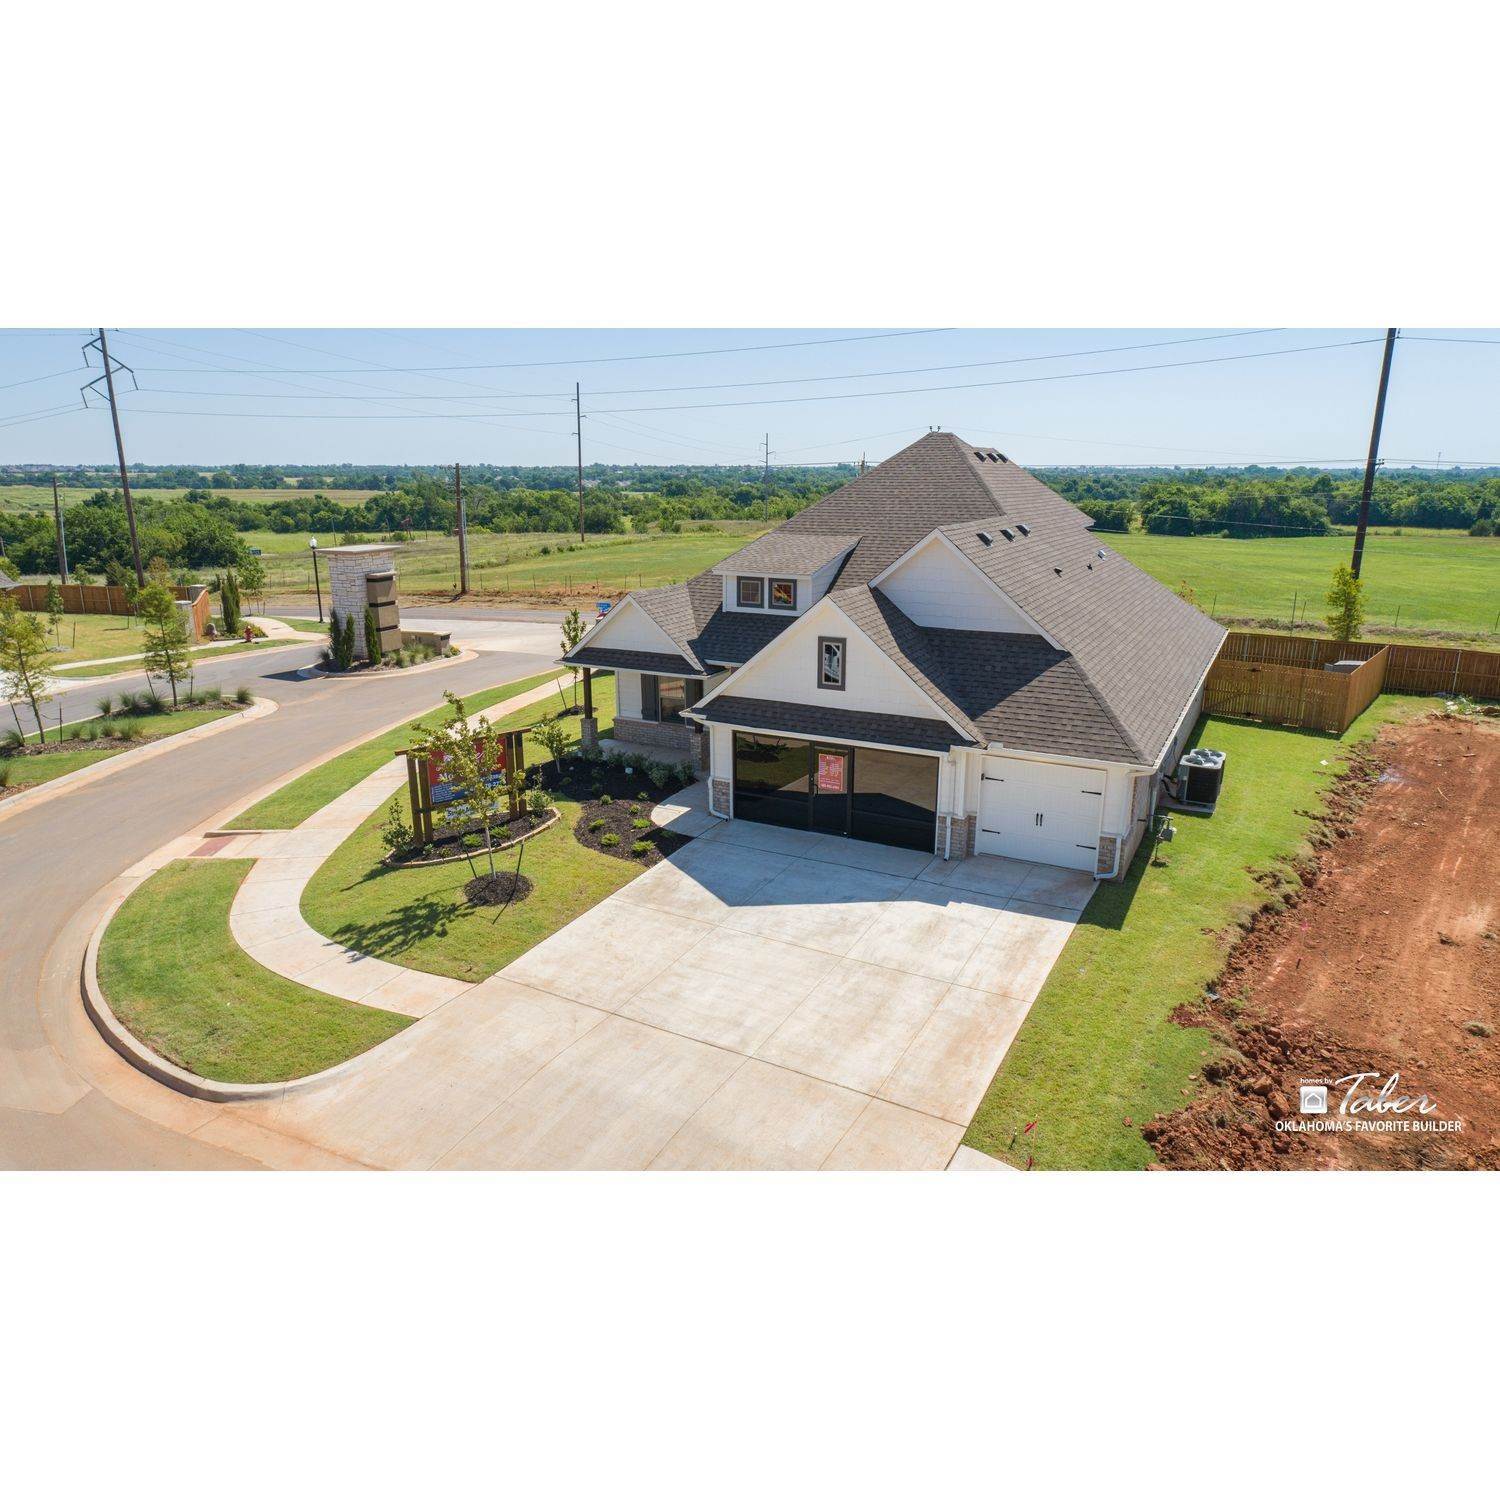 3. Broadmoore Heights building at 2800 Heather Haven, Moore, OK 73160